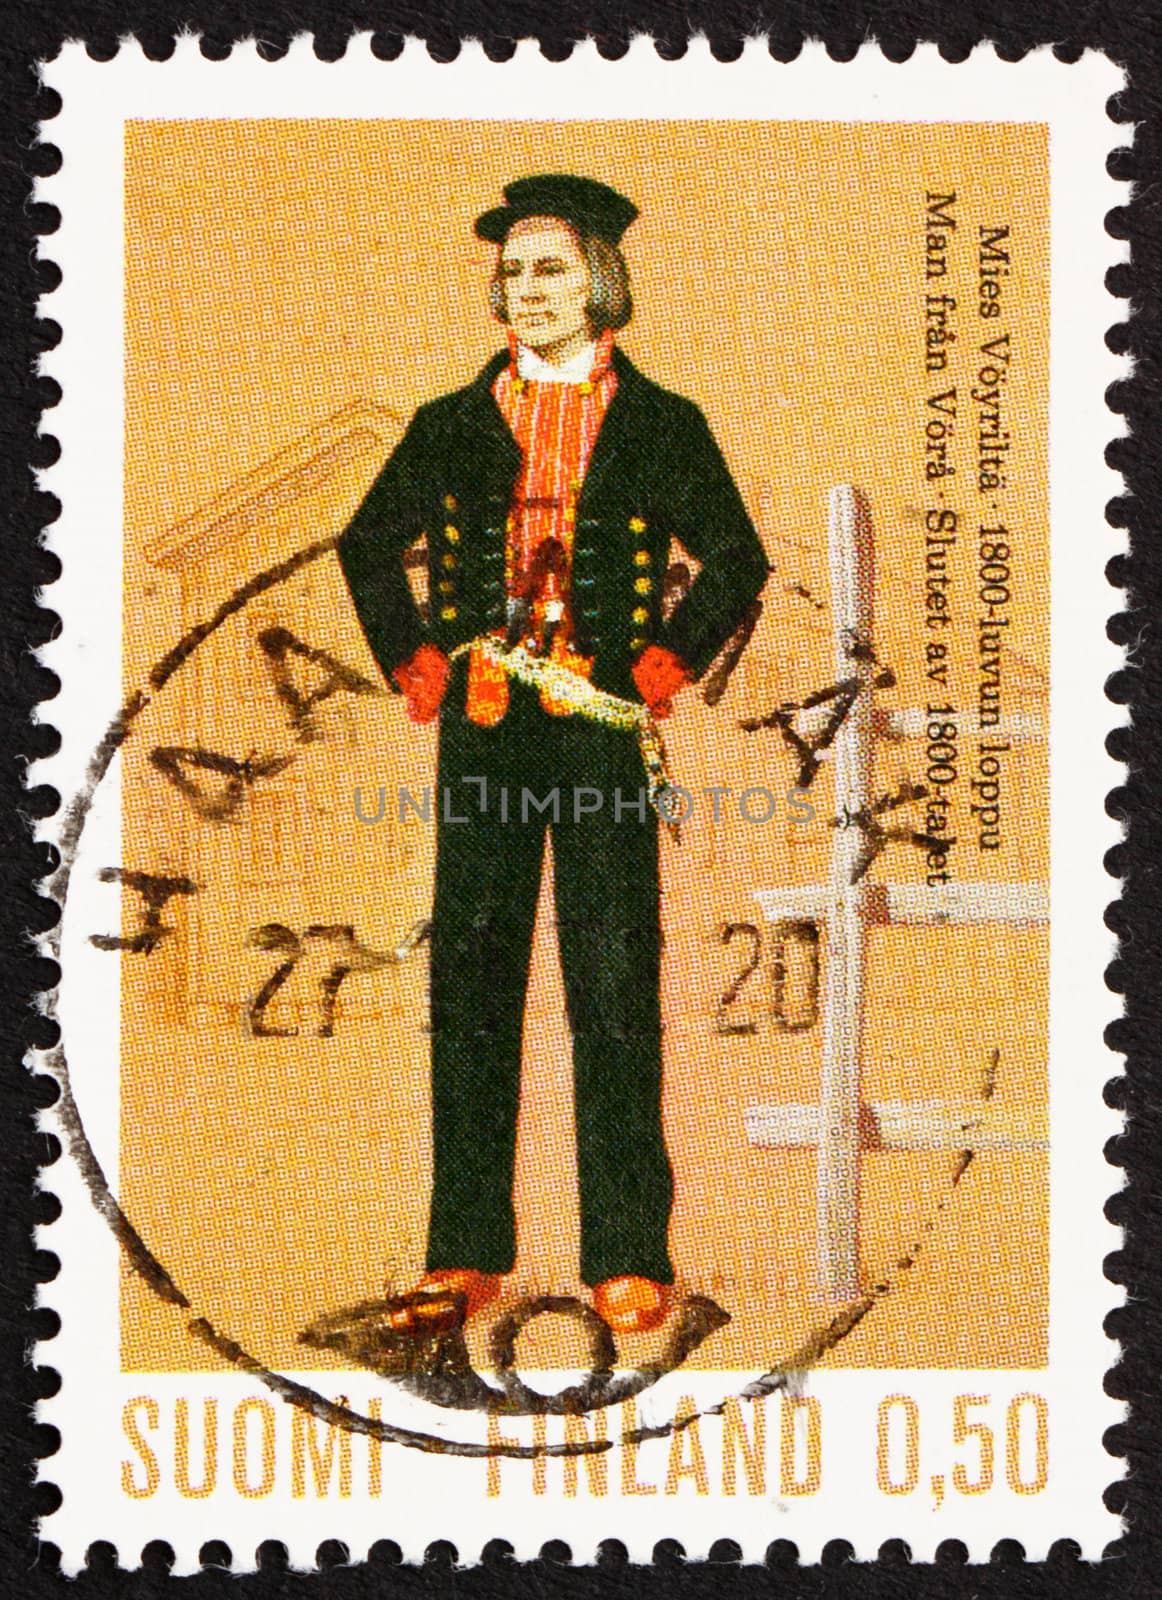 FINLAND - CIRCA 1972: a stamp printed in the Finland shows Man from Voyni, 19th Century, Regional Costume, circa 1972